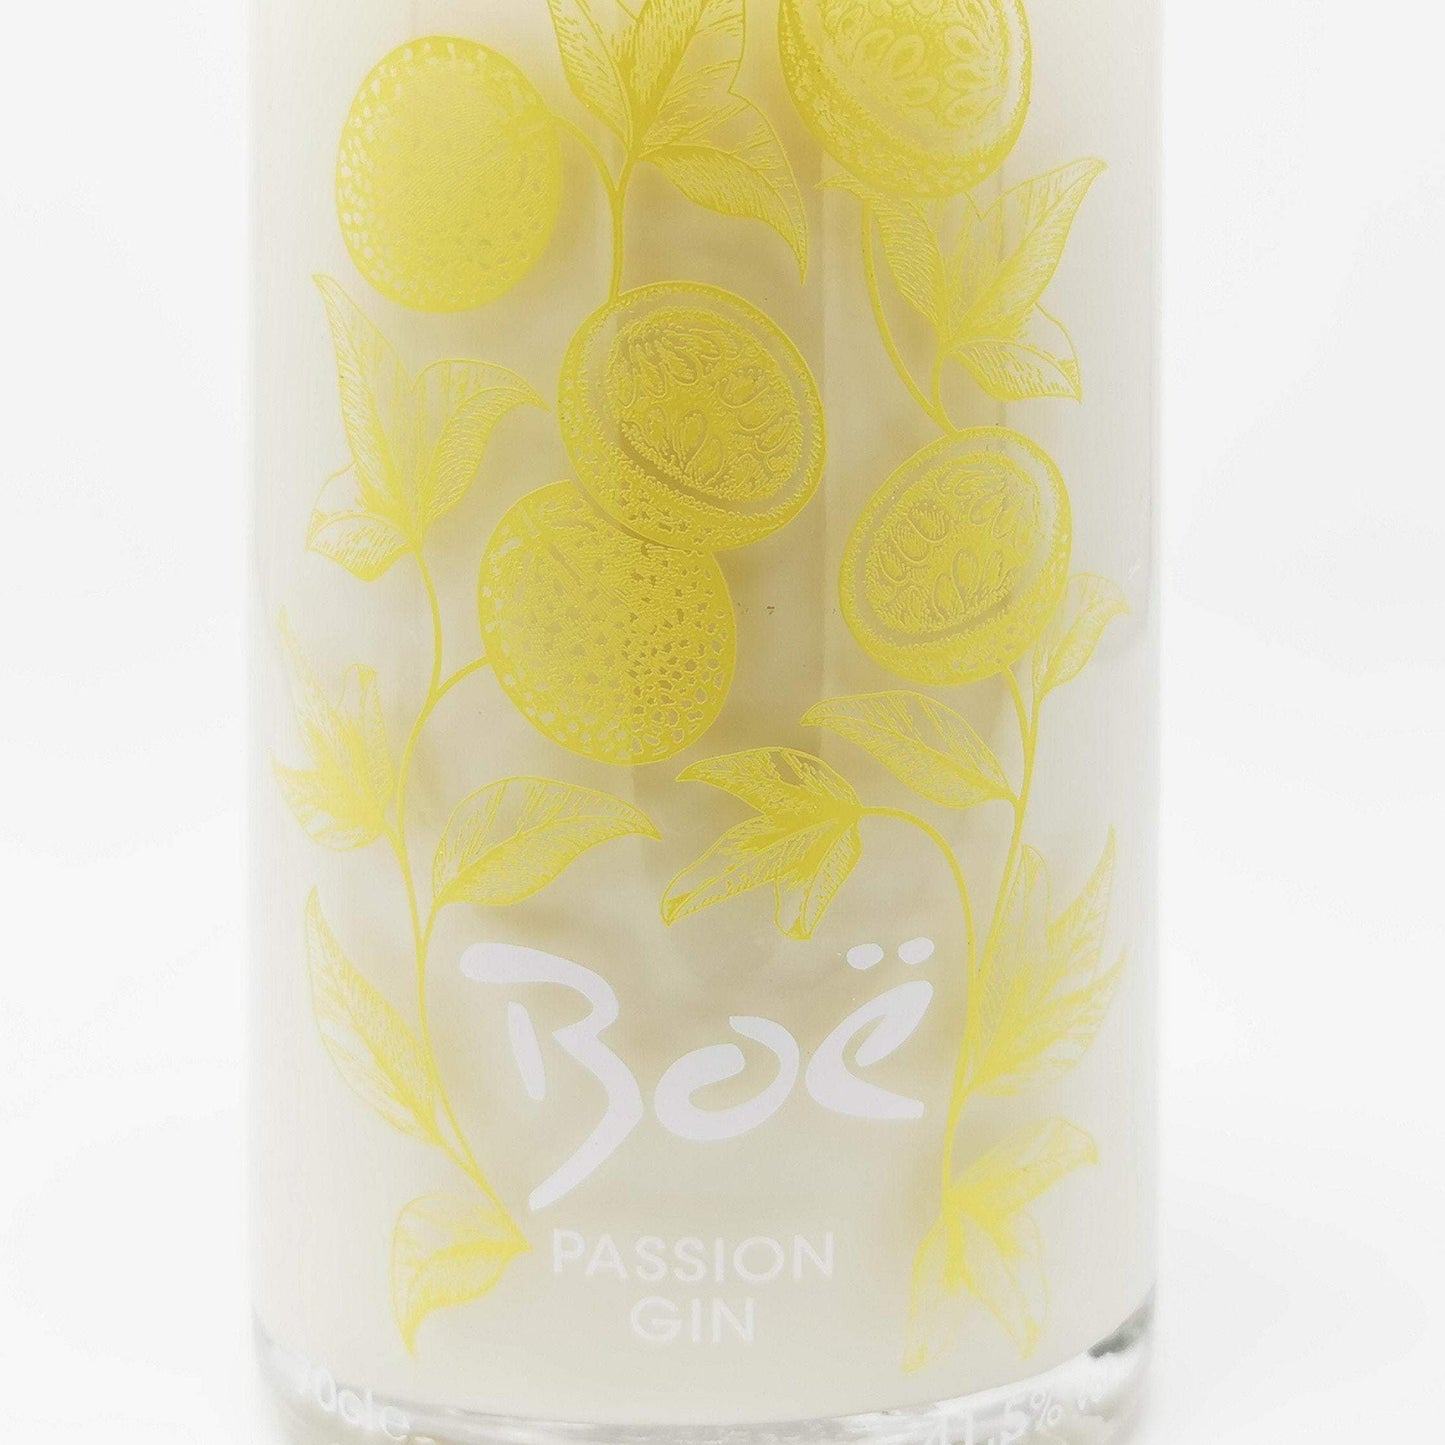 Boe Passion Gin Bottle Candle Gin Bottle Candles Adhock Homeware